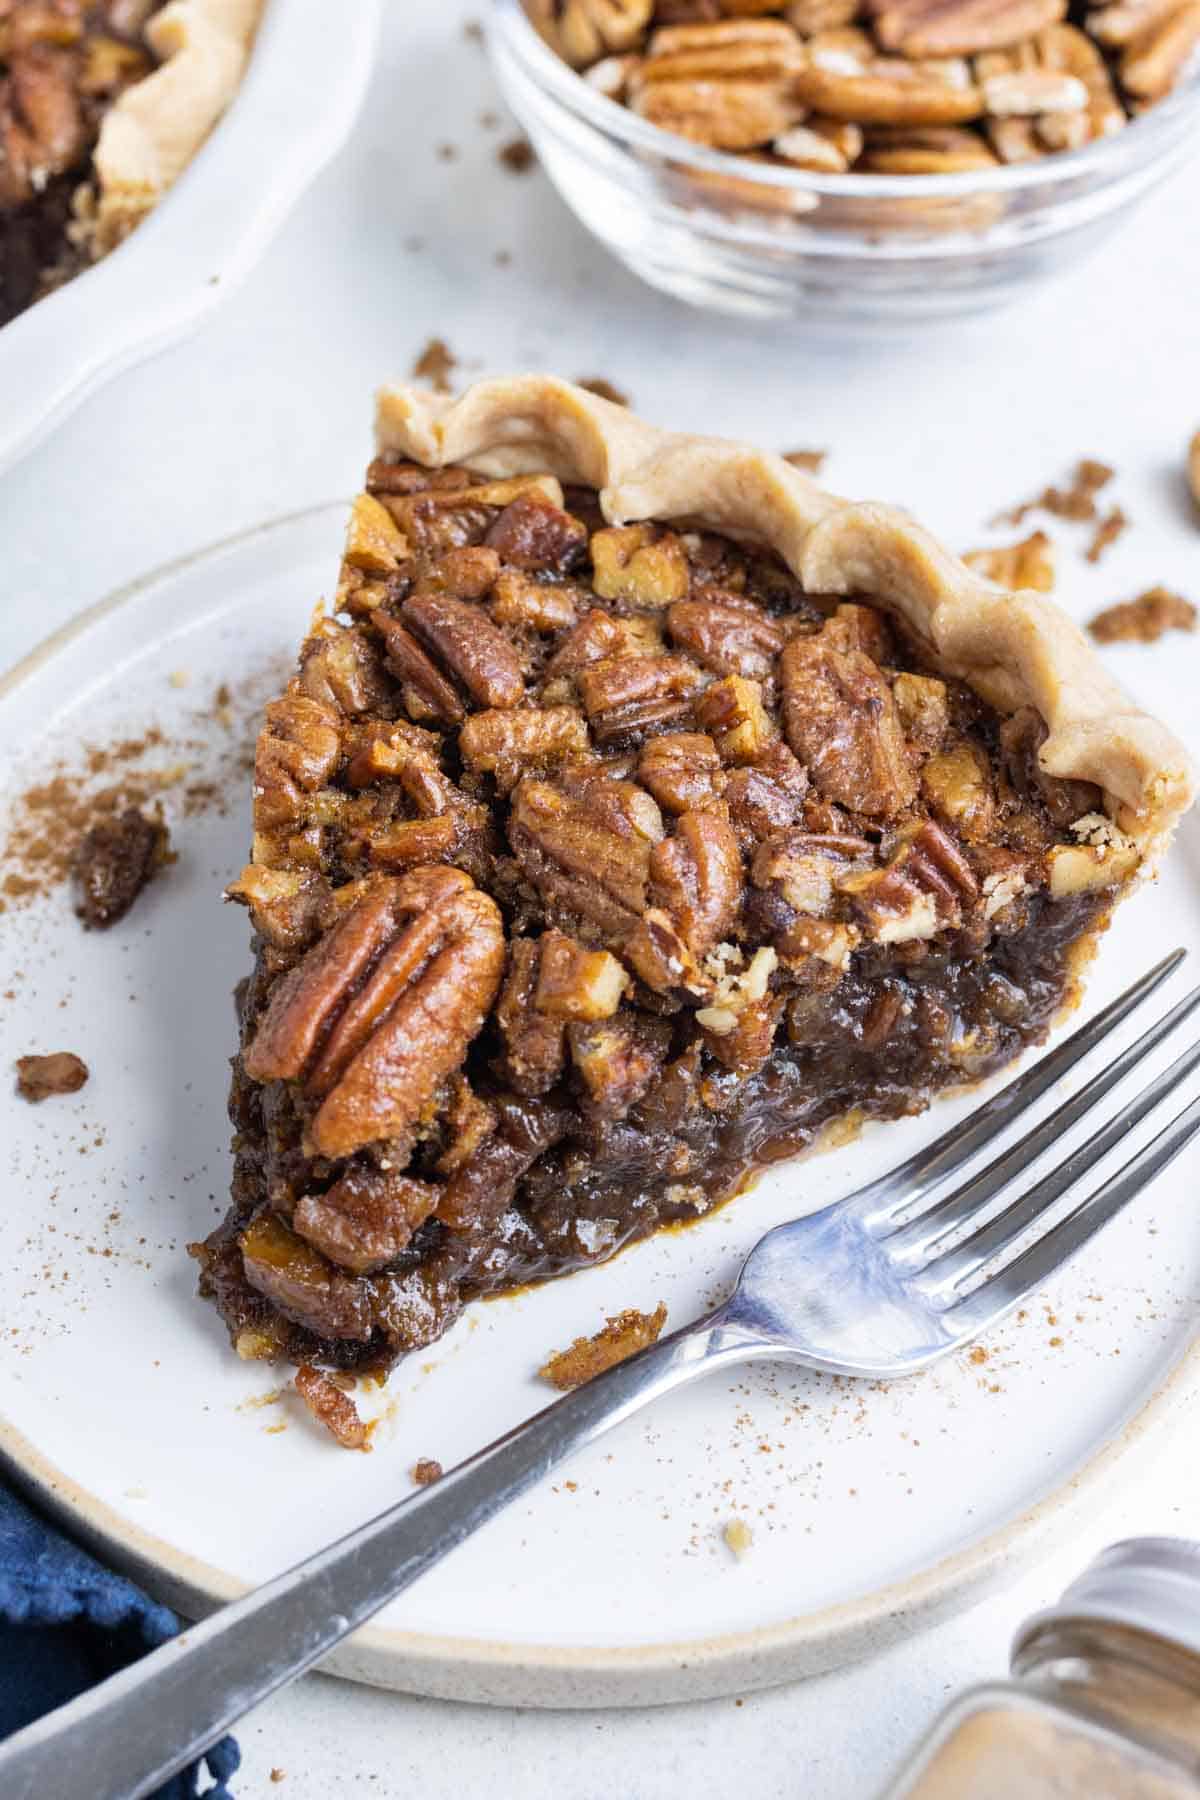 A piece of pecan pie is shown on a plate with toasted pecans.